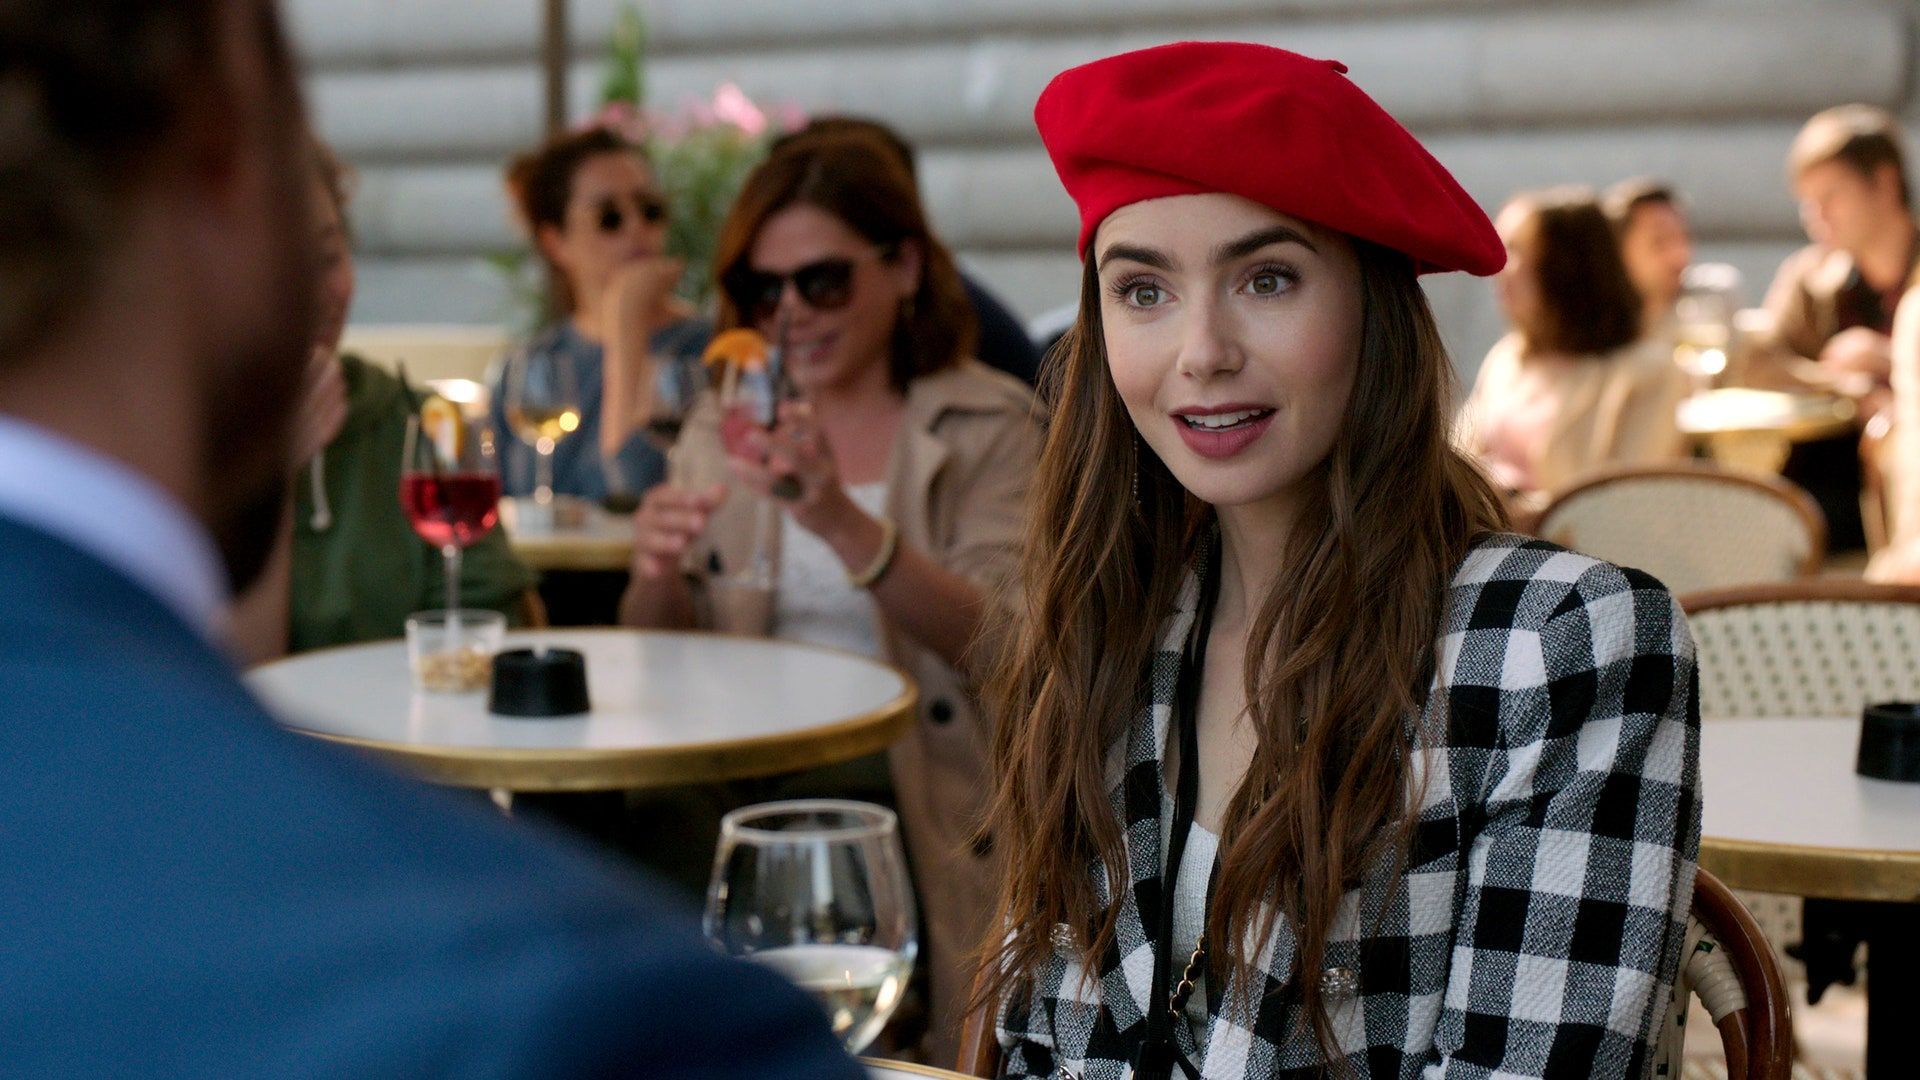 Lily collins portrayed the role of Emily Cooper